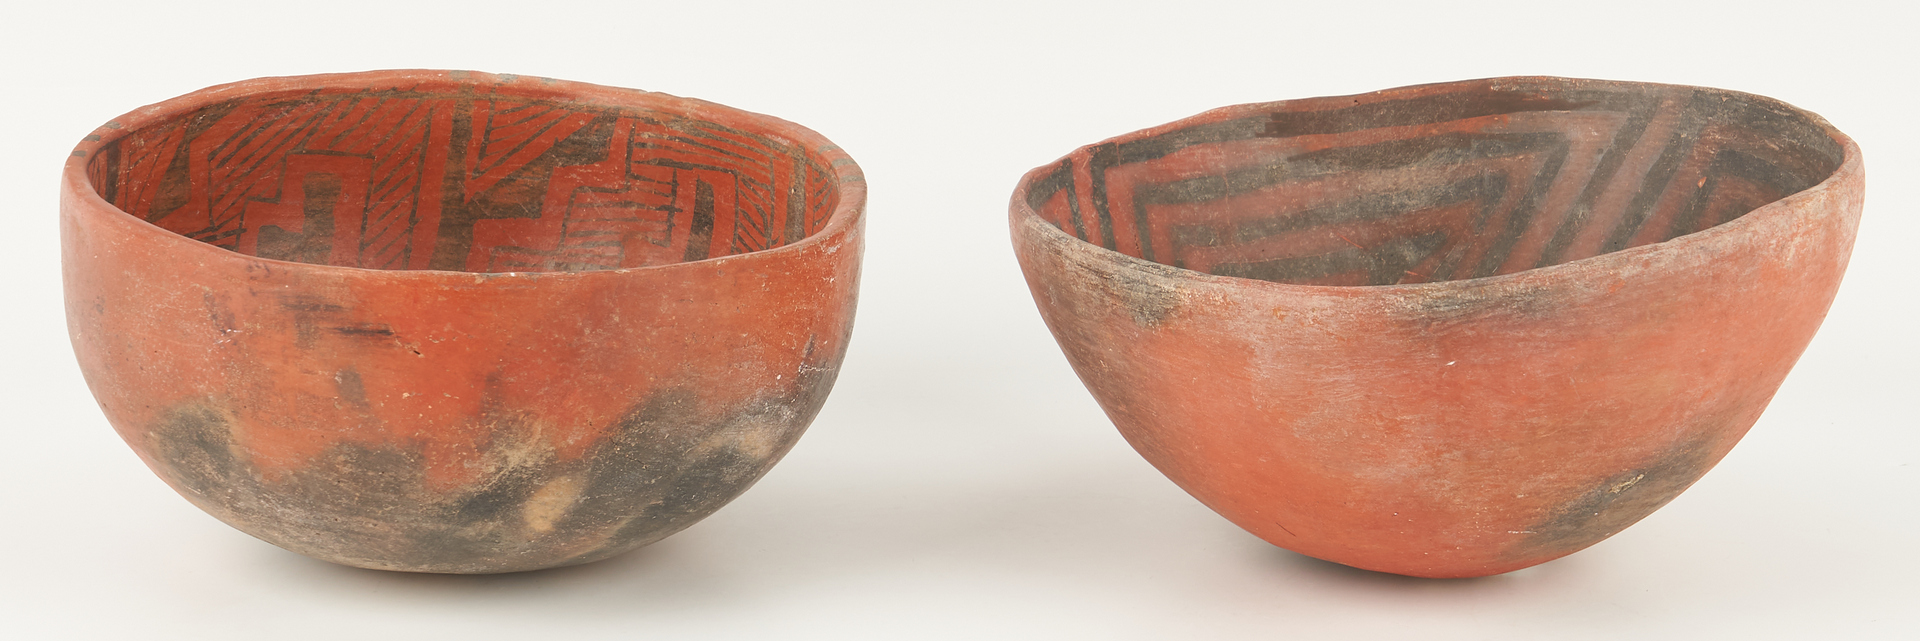 Lot 679: 4 Anasazi Culture Black on Red Pottery Bowls